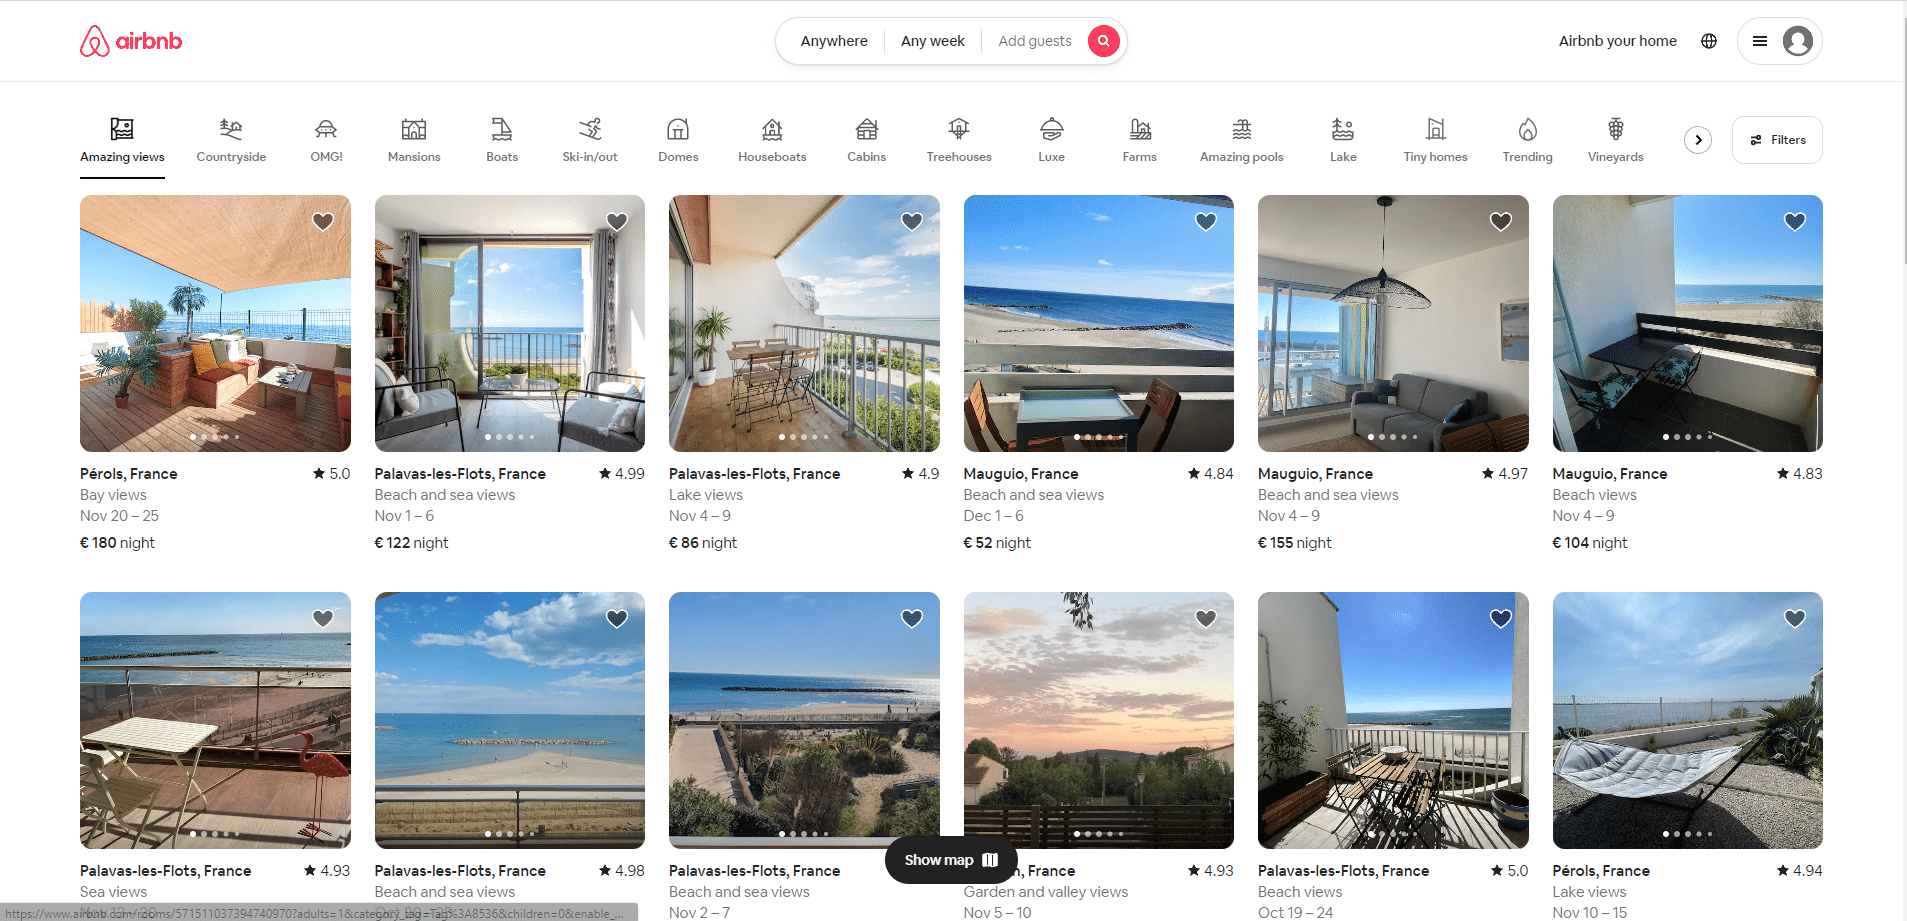 airbnb-us